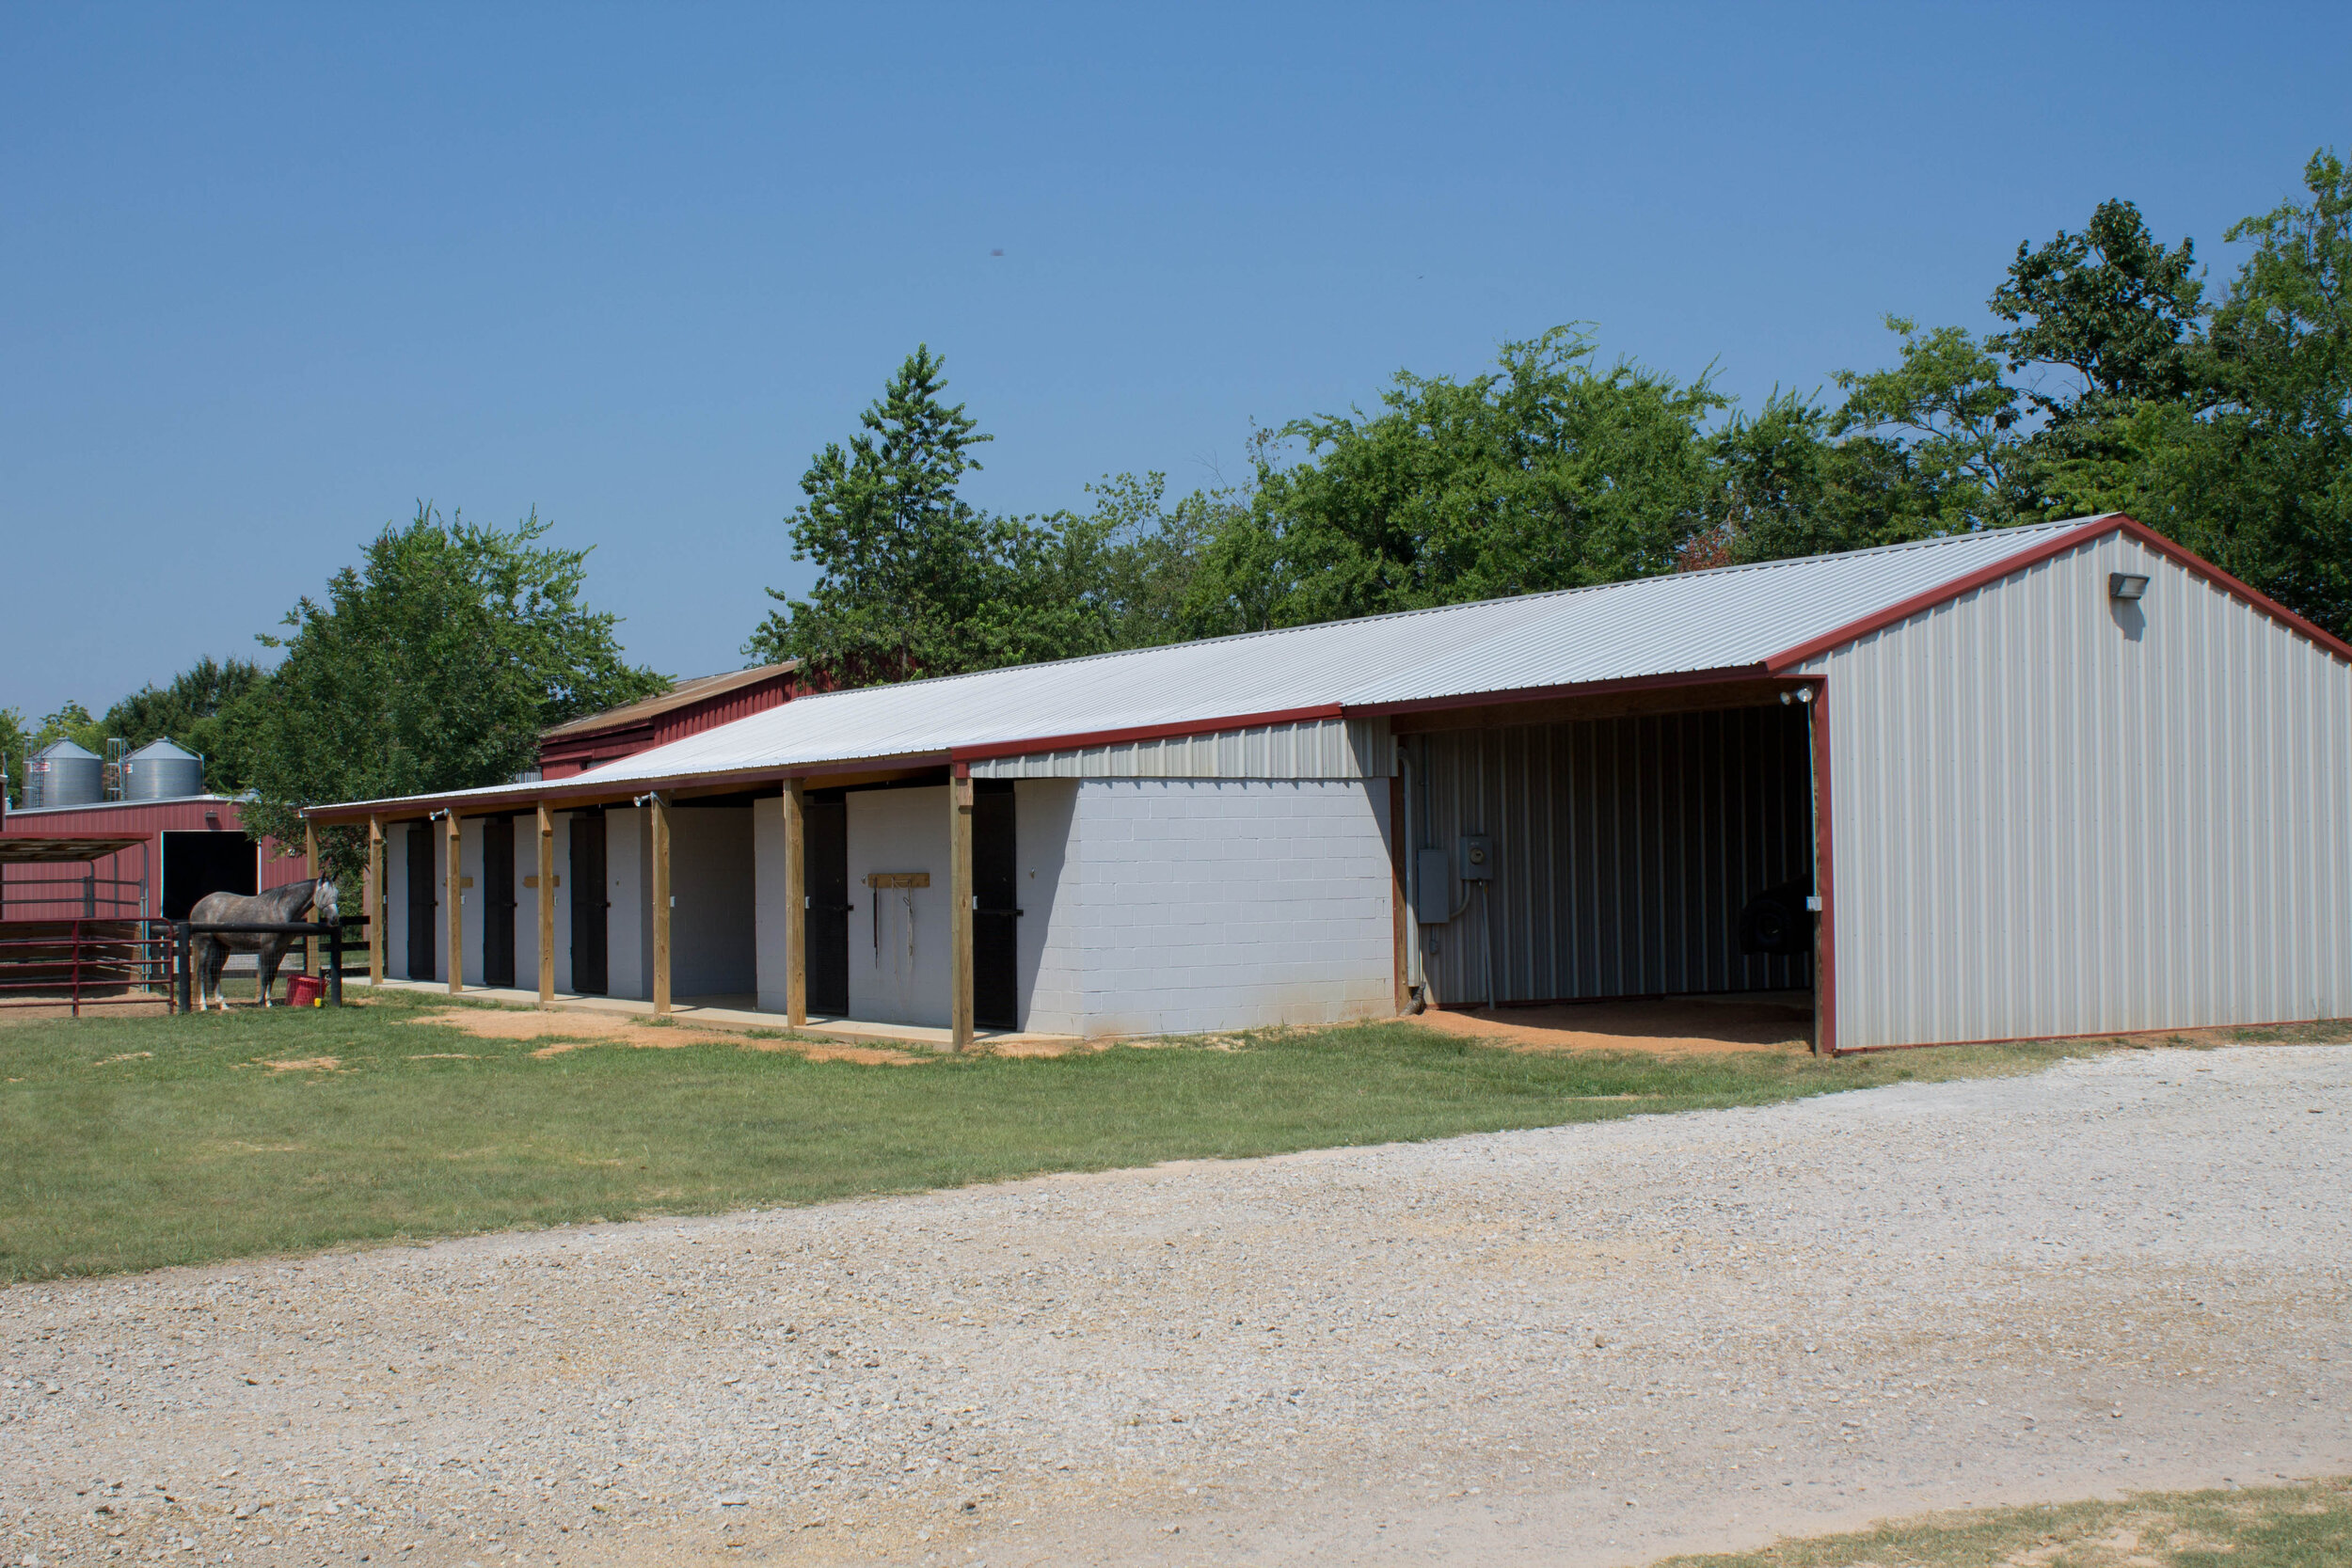 Breeding shed and in-patient barn